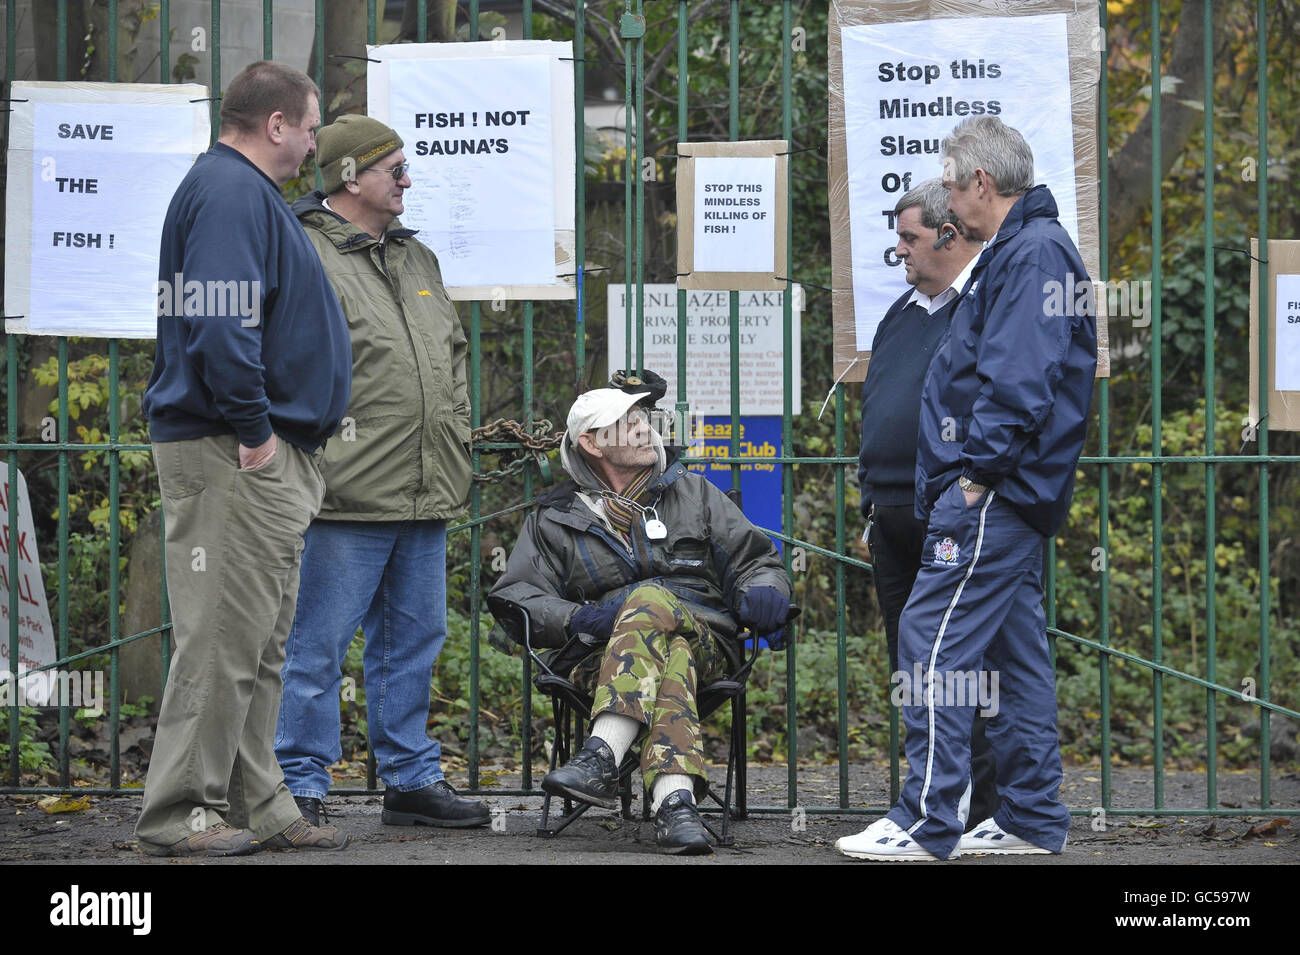 Dave Hodge (sitting centre), aged 59 from Westbury-on-Trym, is chained to the entrance gates at Henleaze swimming club, Henleaze, Bristol, where fish are scheduled to be culled to make the lake safe for swimmers. Stock Photo